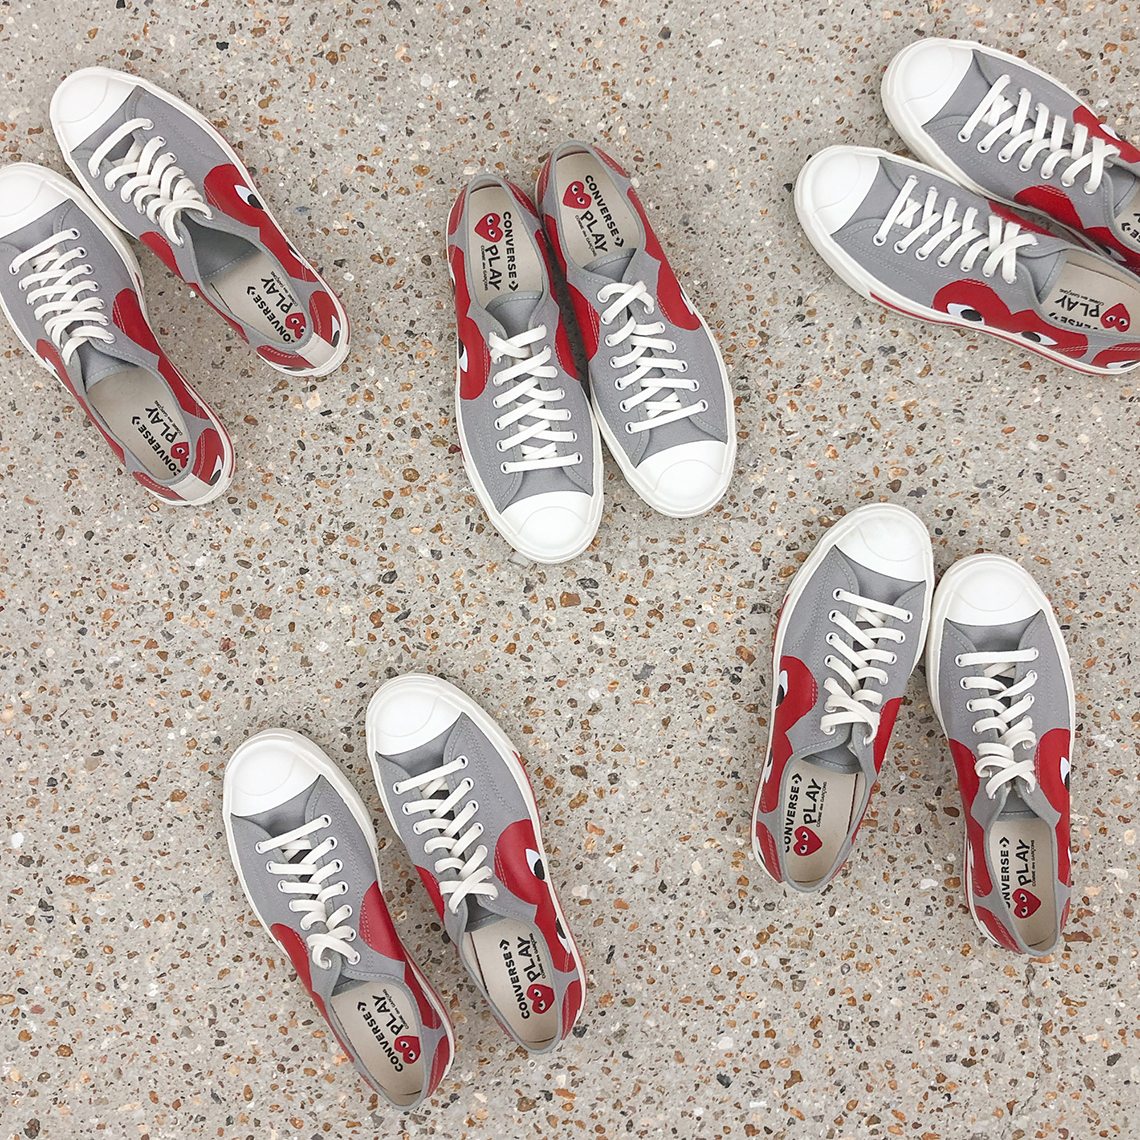 COMME des GARCONS PLAY x Converse Jack Purcell Collection April | SoleSavy News